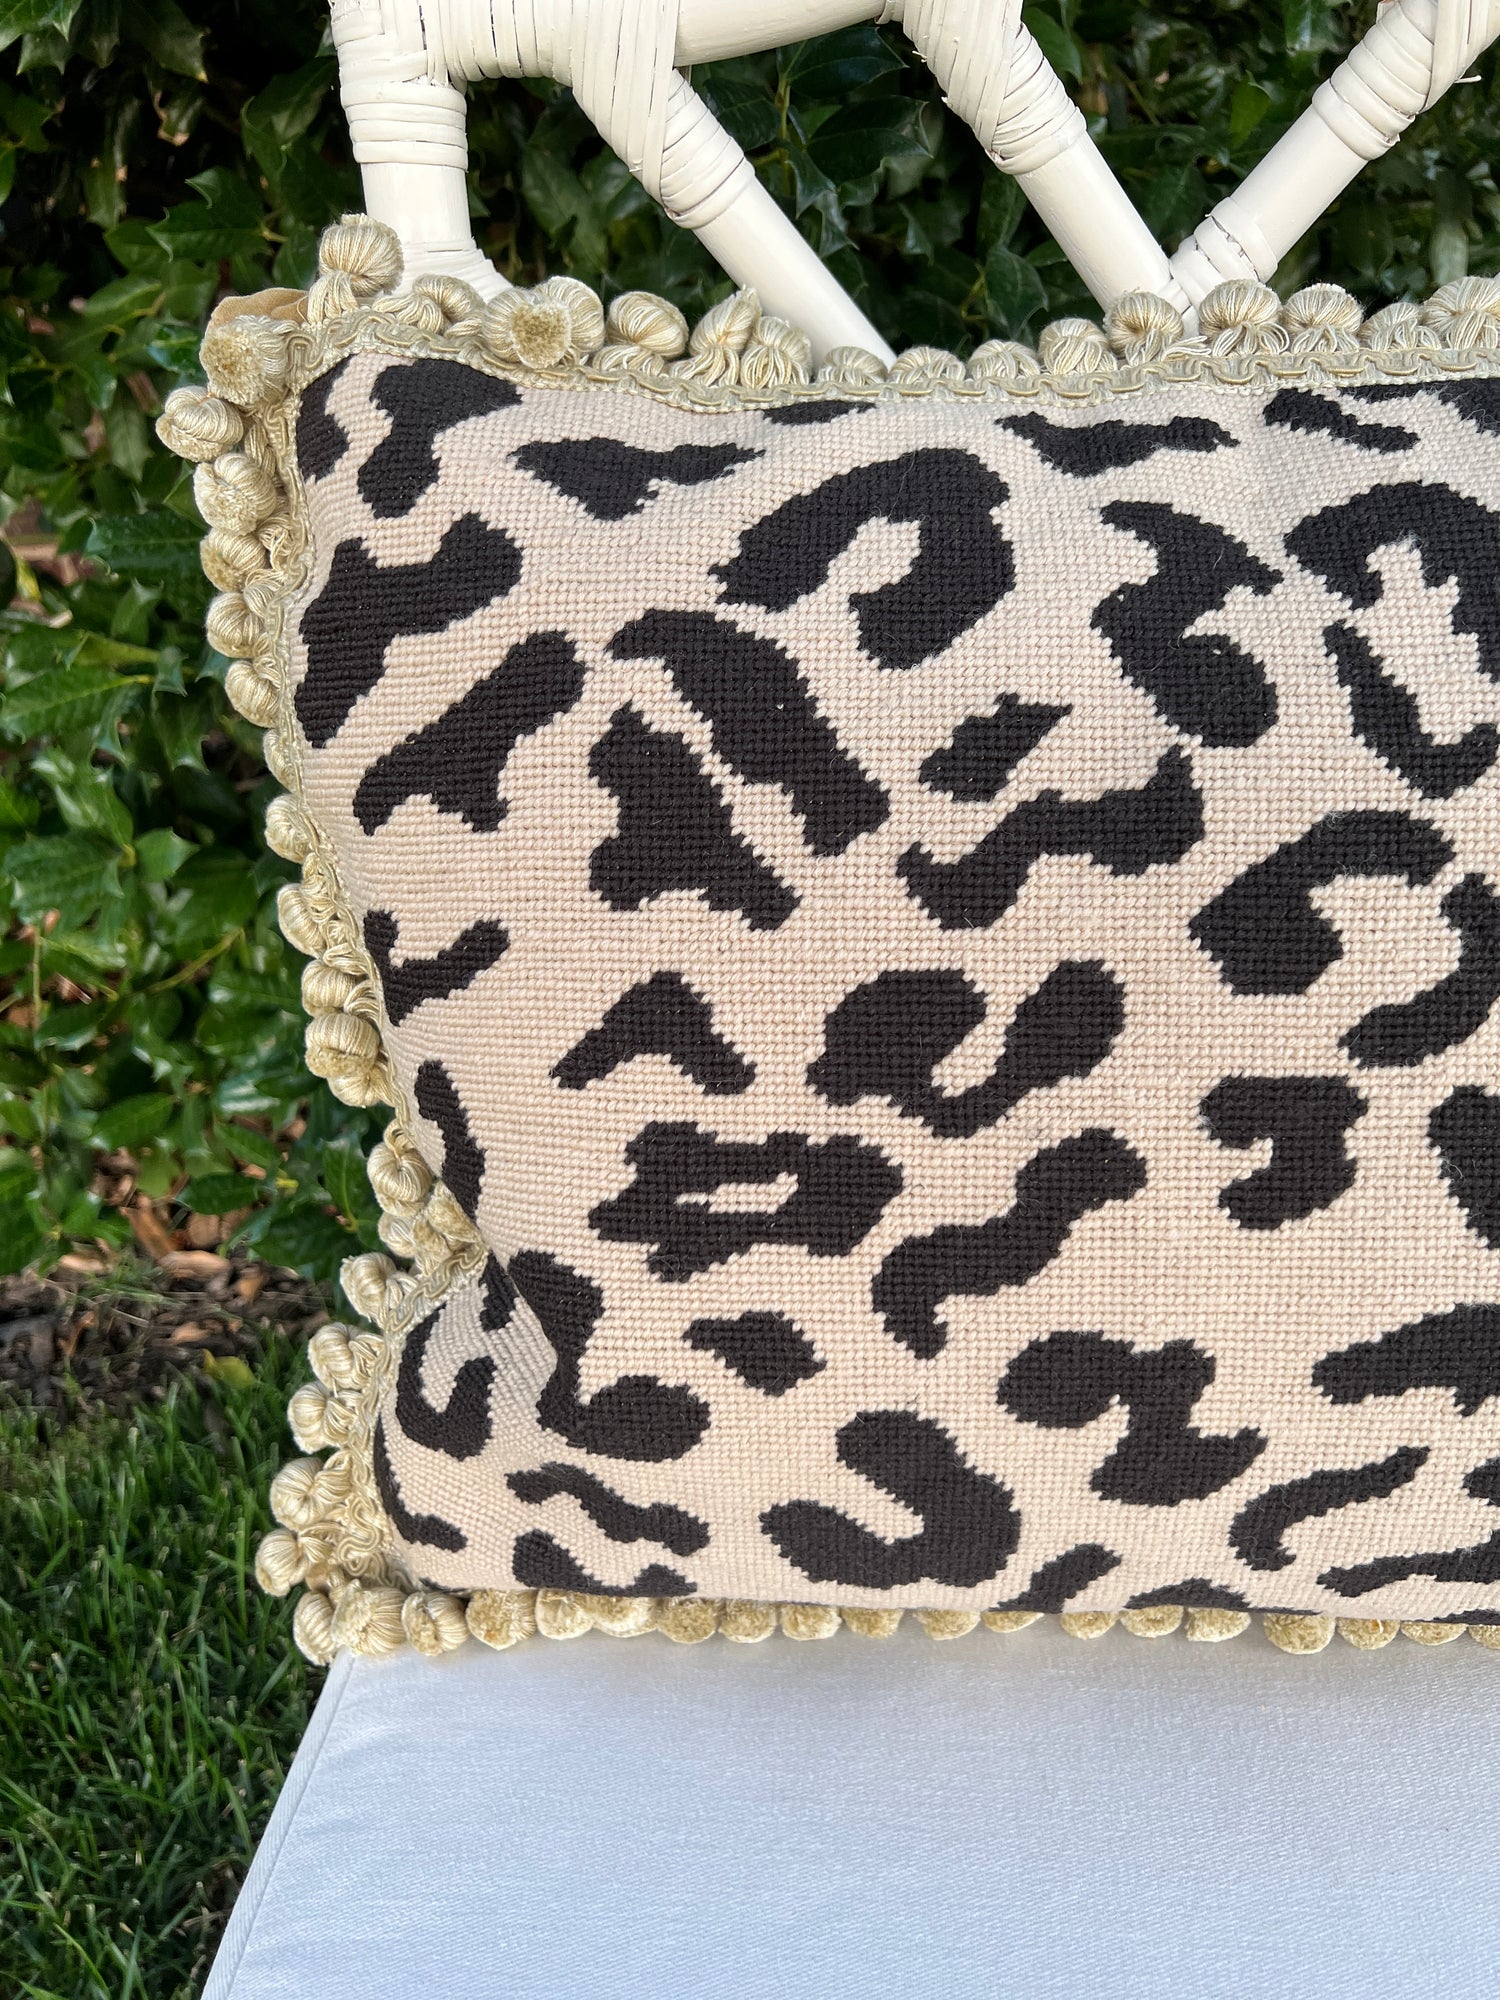 Beige and black leopard needlepoint throw pillow